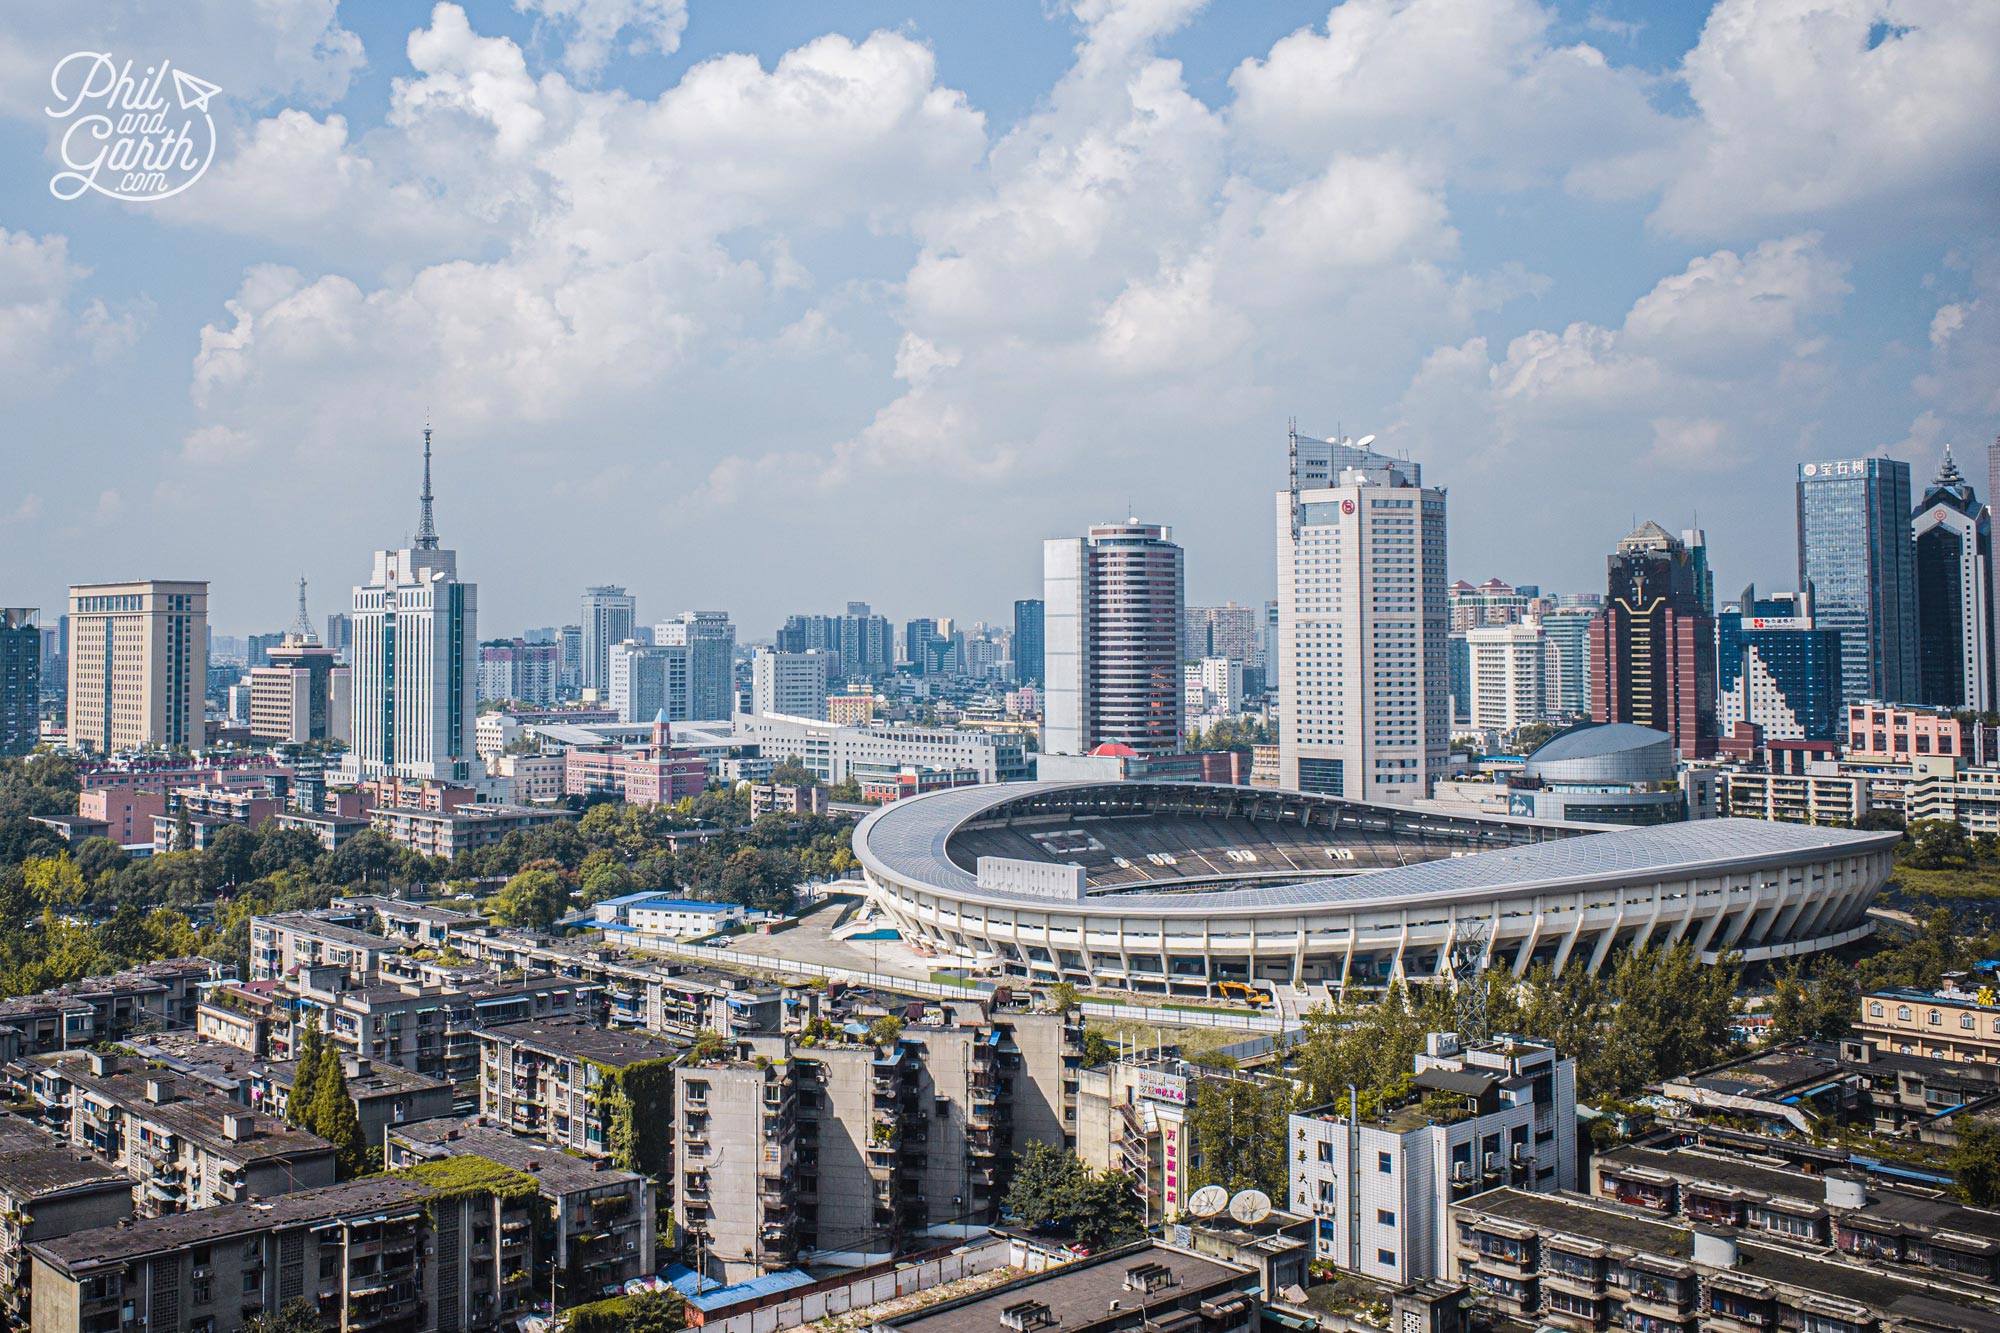 Chengdu is China’s 5th largest city by population